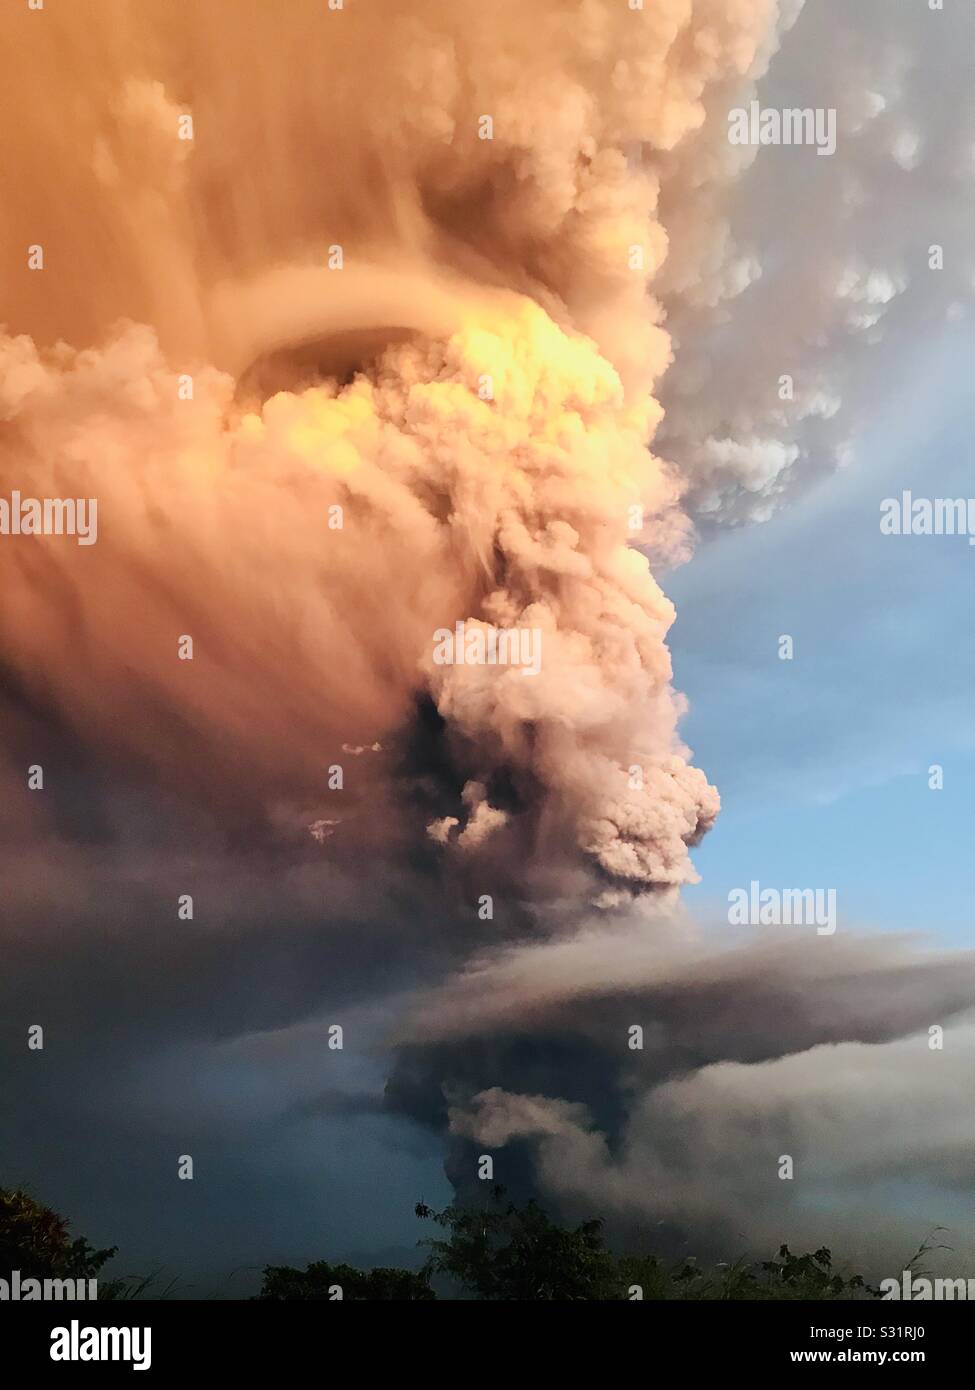 Latest news! Various figures appear during the eruption of Taal Volcano in Batangas, Philippines. There were spews of ashes due to phreatic explosion reaches the sky. Residents of forced to evacuate. Stock Photo